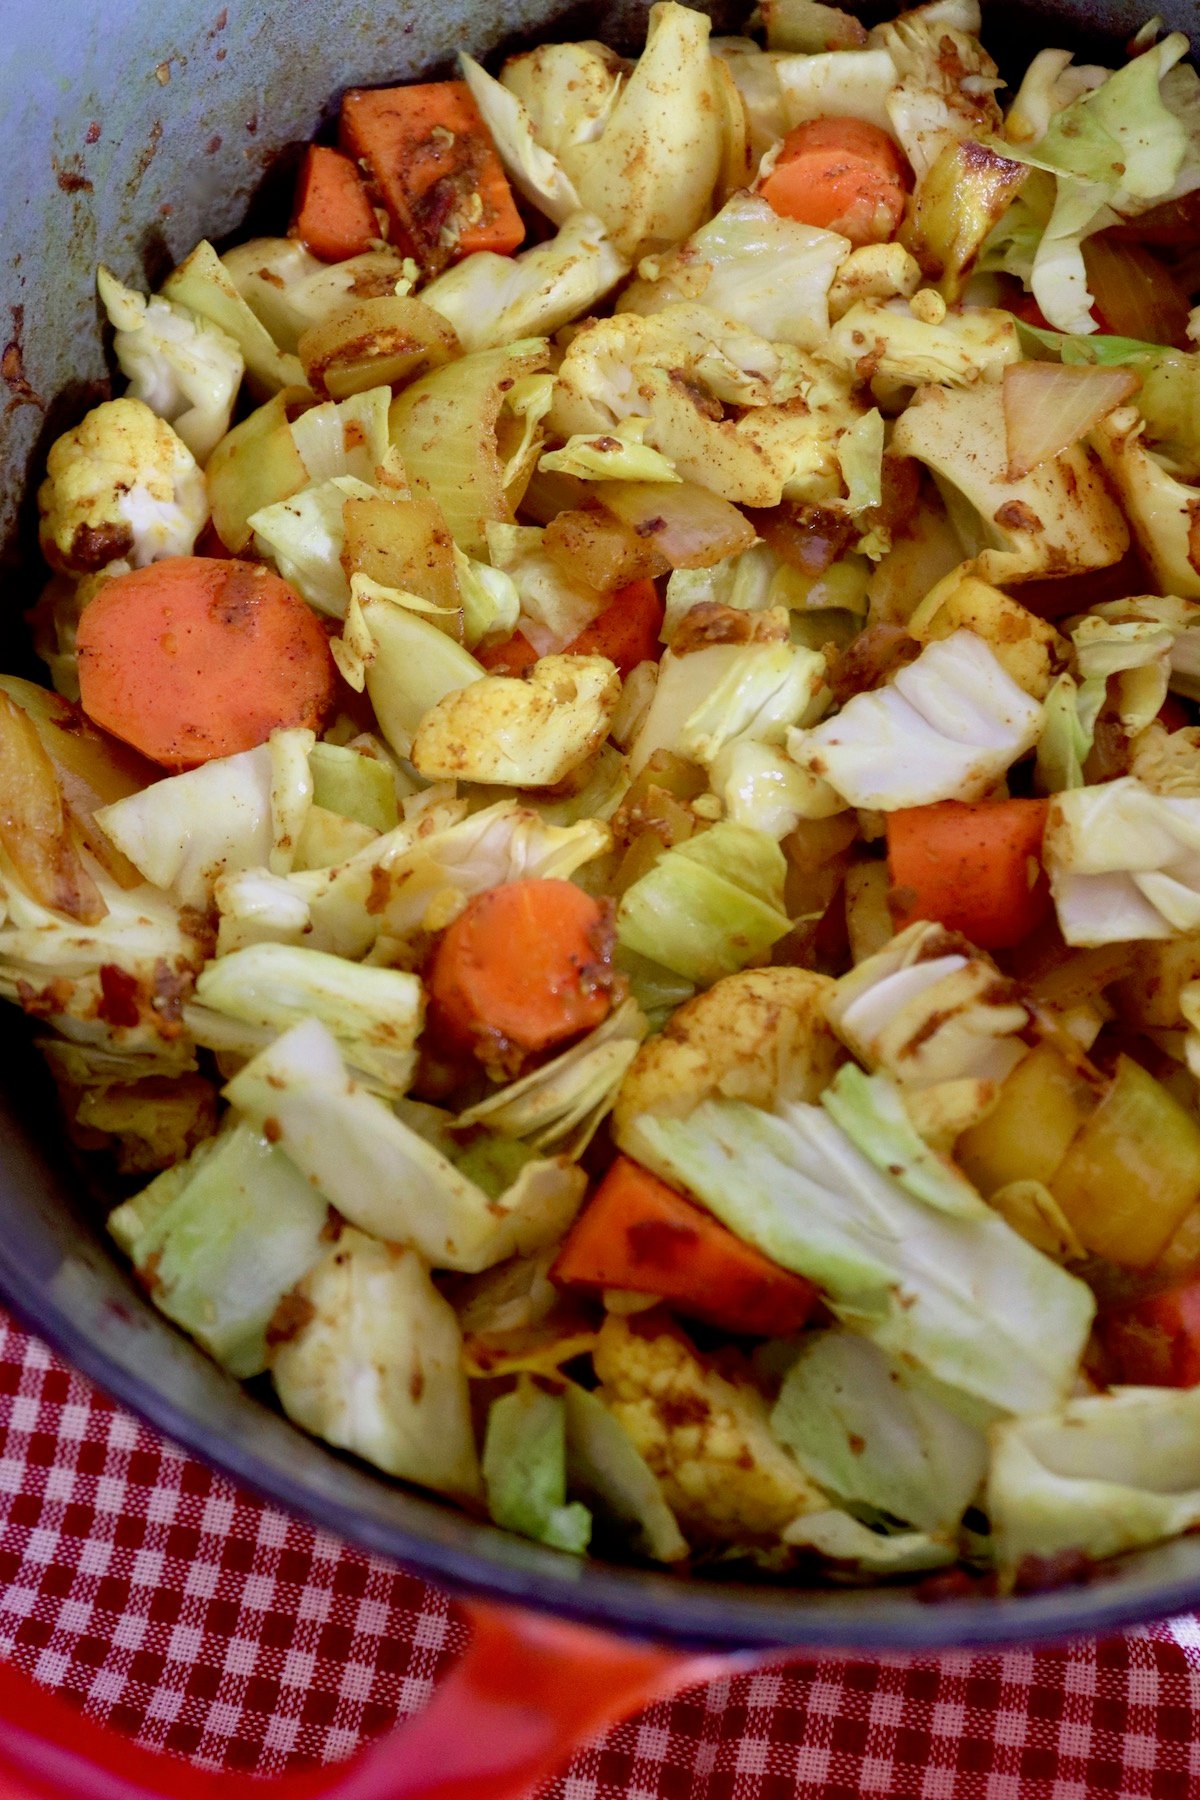 Dutch oven with cabbage and carrots.